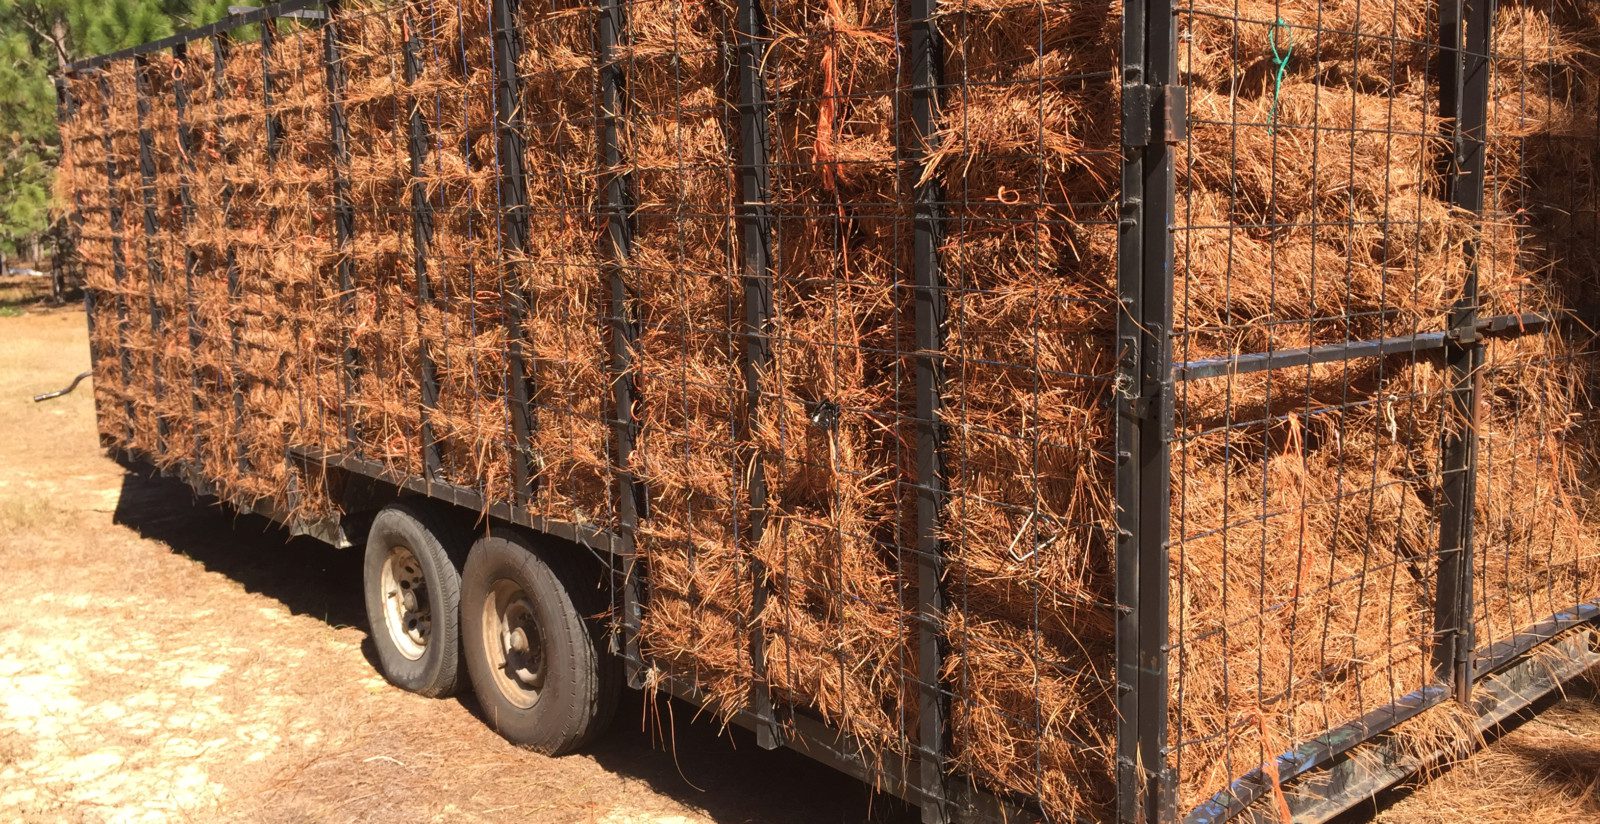 Pine straw bales are loaded into a trailer.